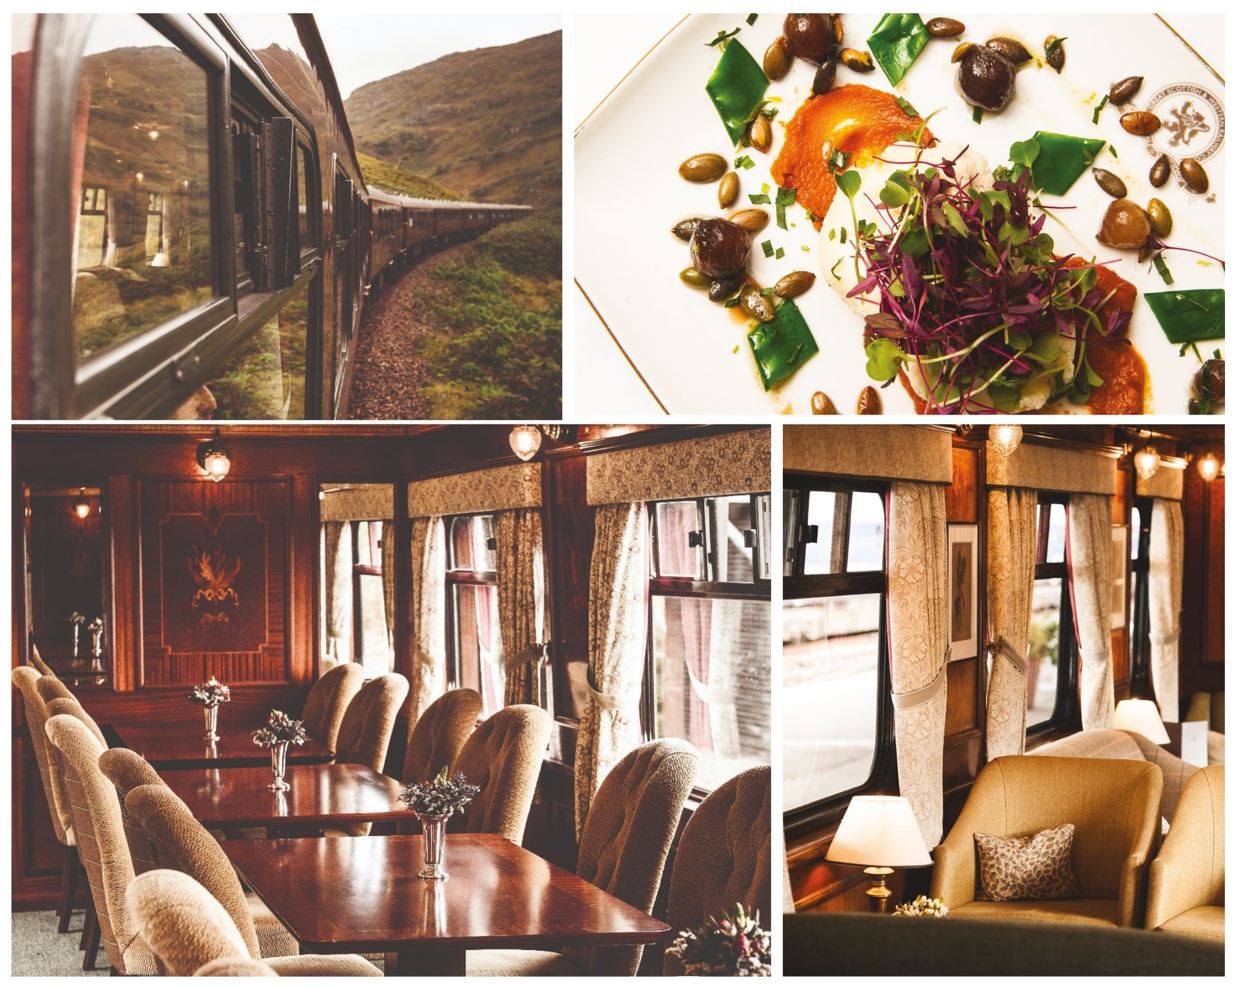 Royal Scotsman train most picturesque train journeys best train rides ever night trains daylight trains travel and home min